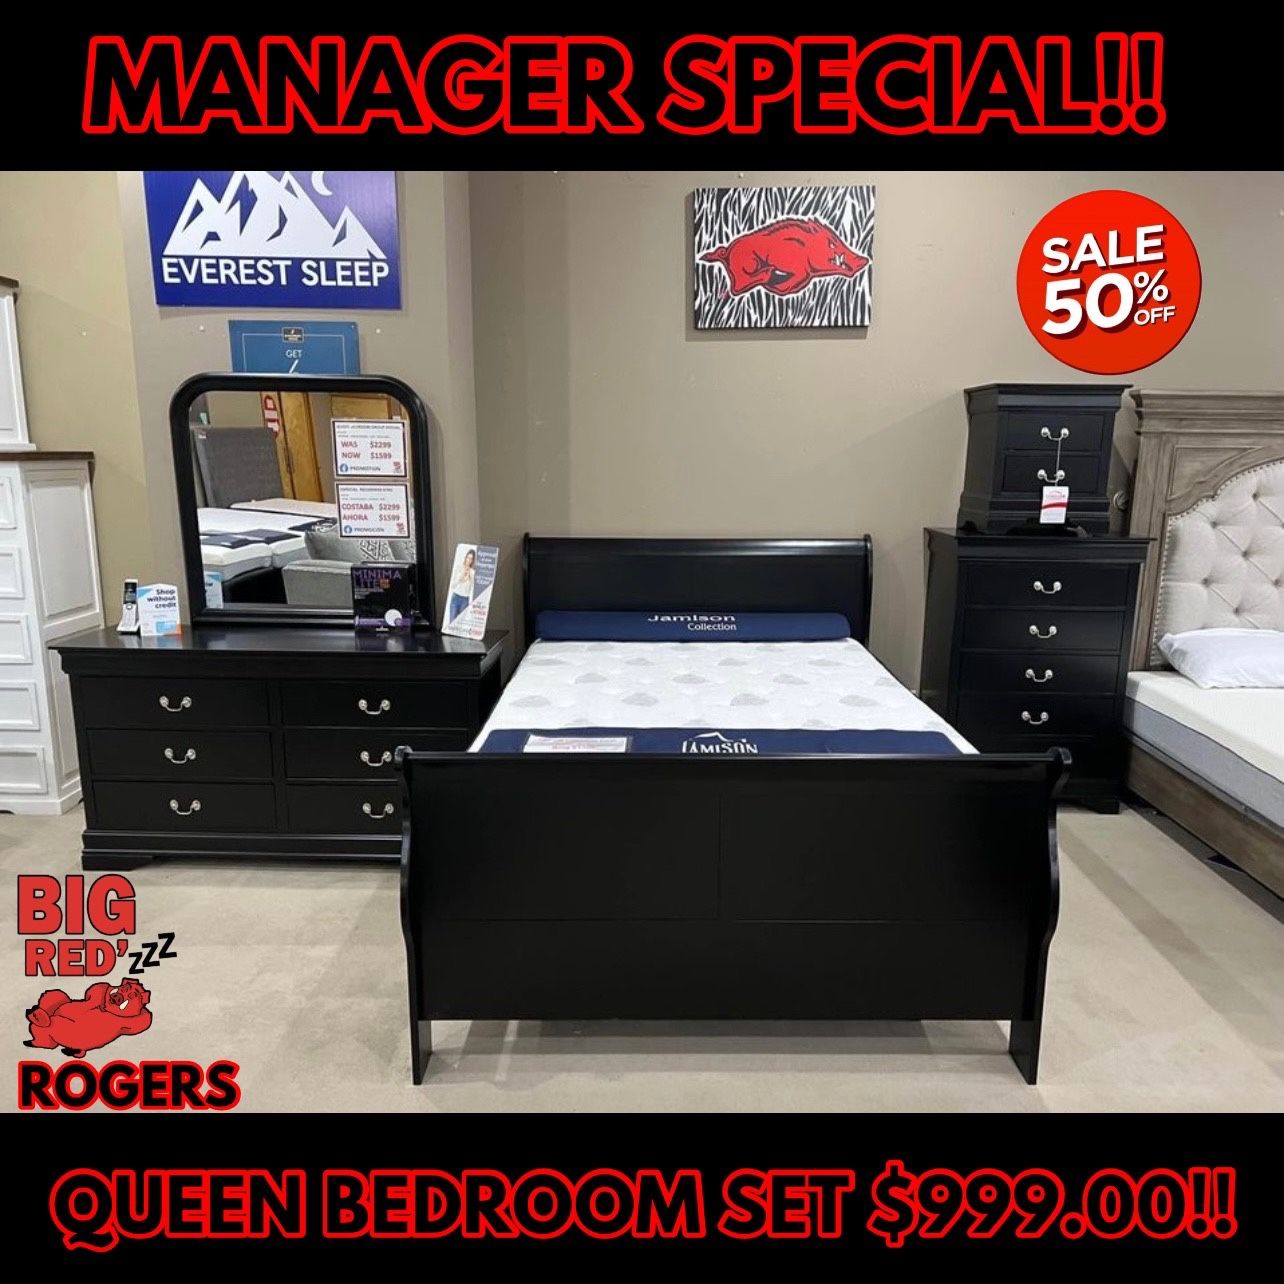 ‼️MANAGER SPECIAL‼️ Queen Bedroom Set Now Only $999.00!!